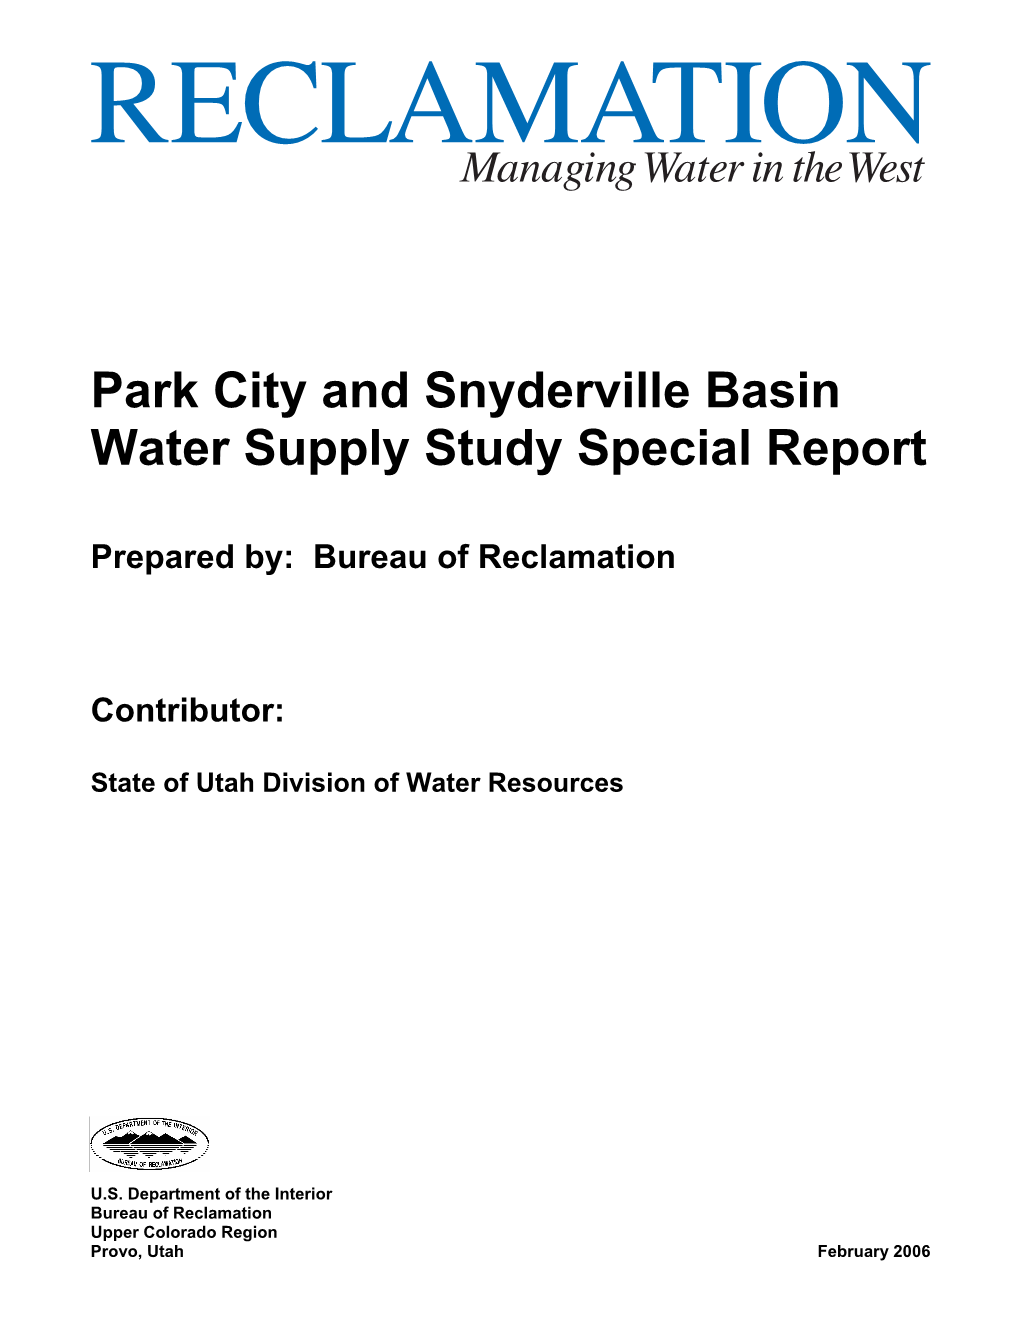 Park City and Snyderville Basin Water Supply Study Special Report